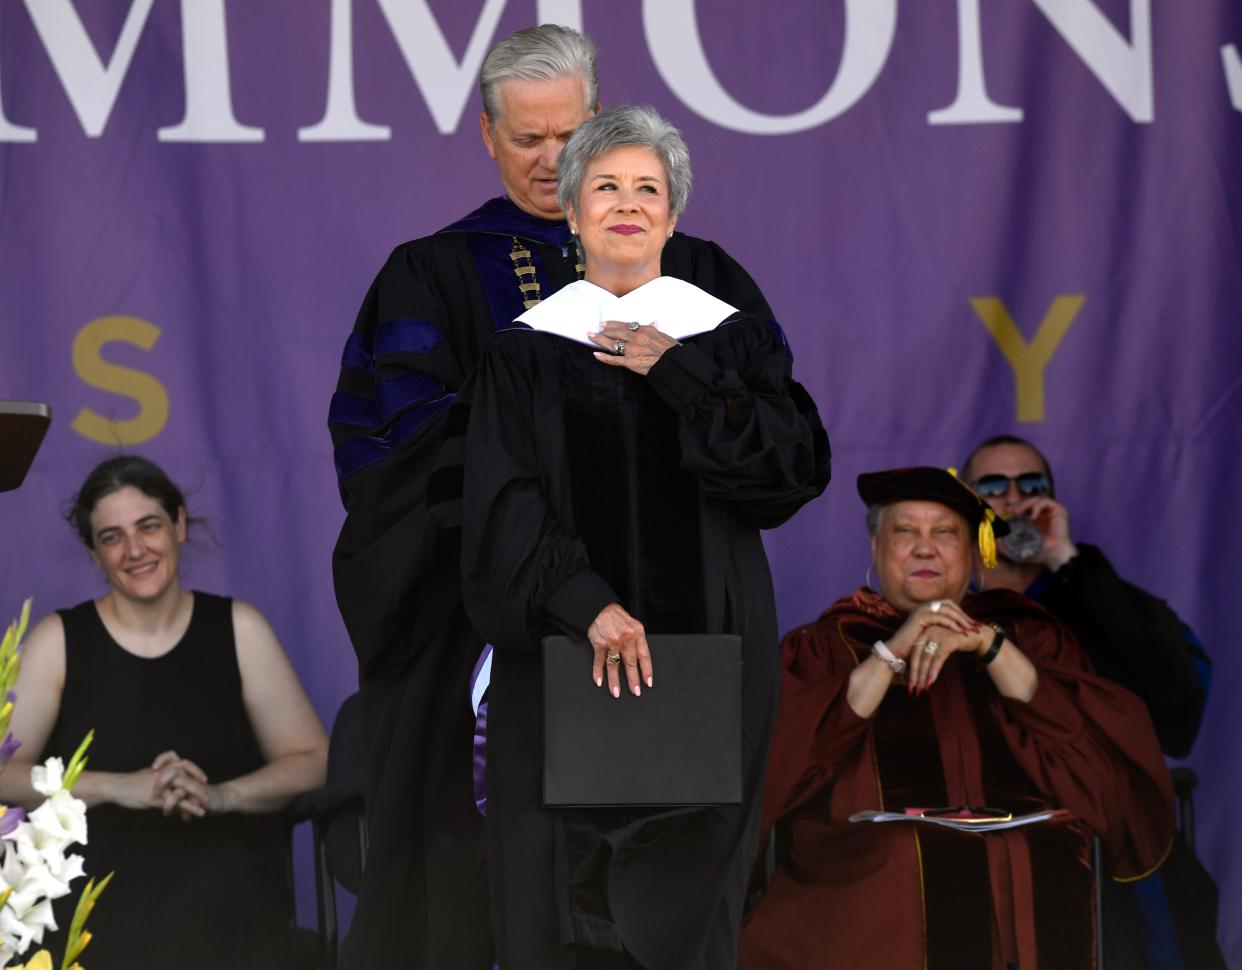 Former first lady of Hardin-Simmons University Carol Hall is hooded by current HSU President Eric Bruntmyer after conferring an honorary degree upon her during Friday's graduation ceremony. Hall's husband, Lanny, twice served as president of HSU. His wife was honored for her many activities related to the university and the community.